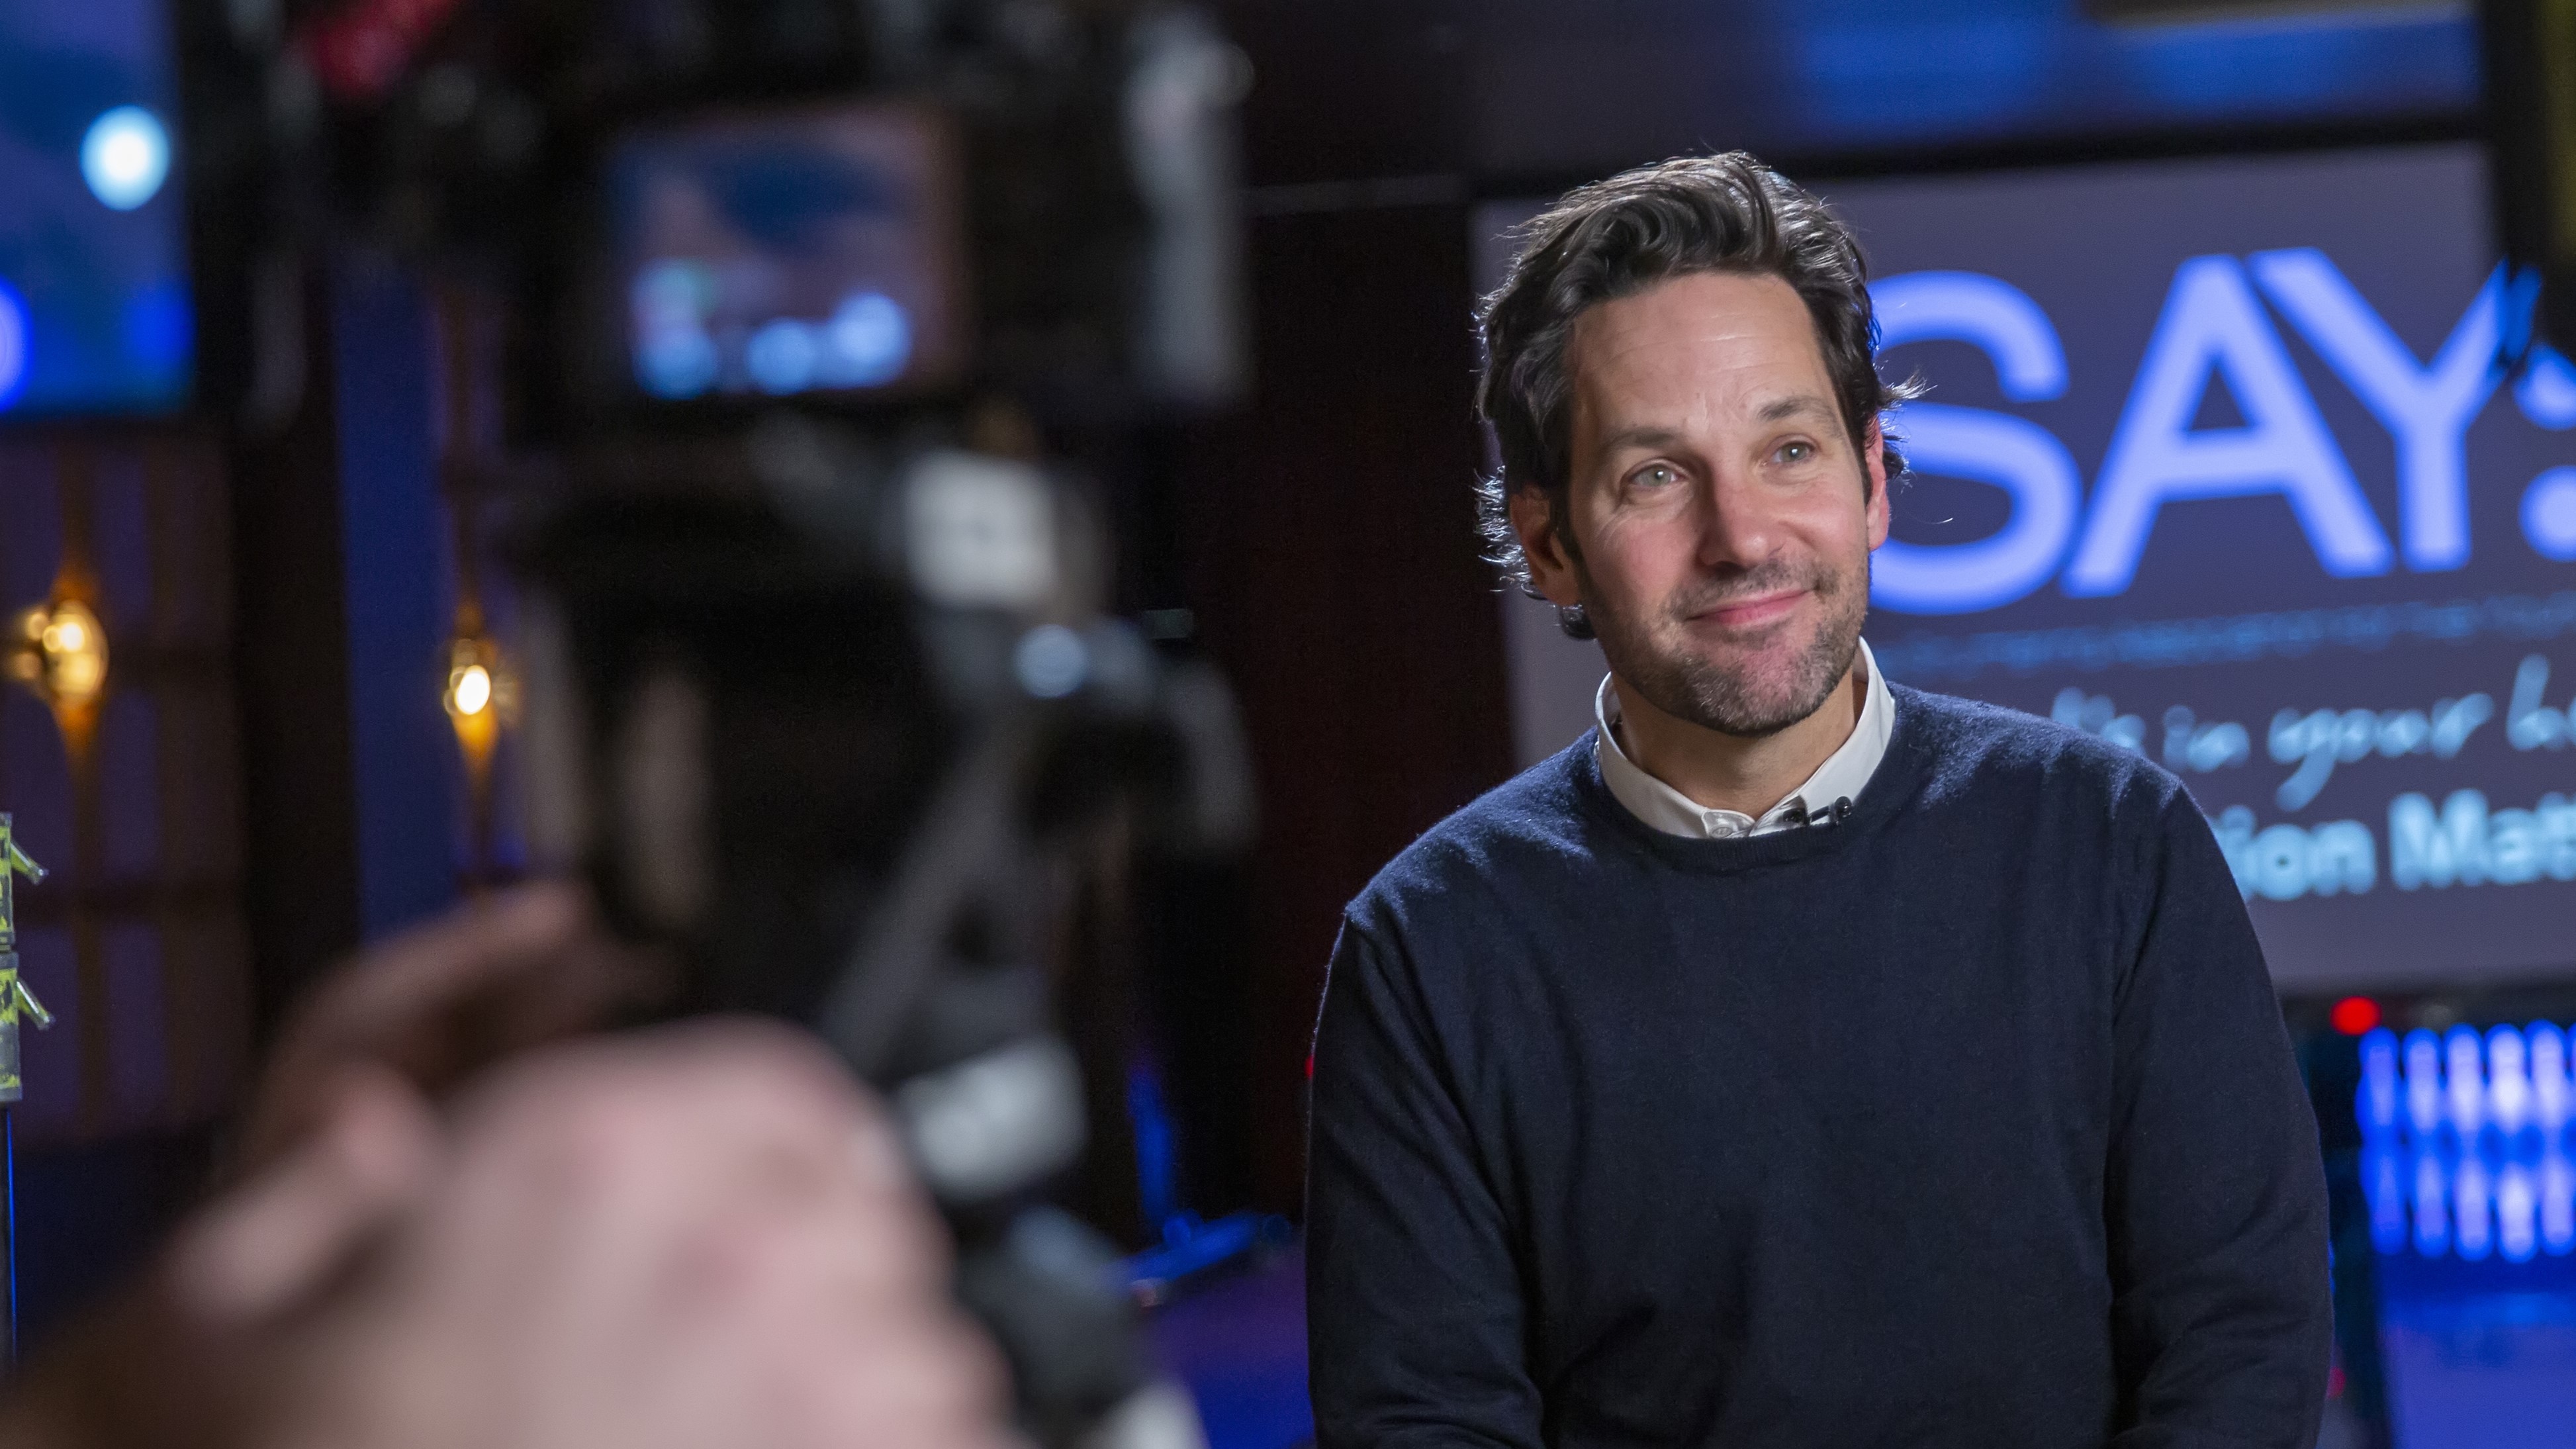 Paul Rudd All-Star Benefit - January 22nd at 7 pm